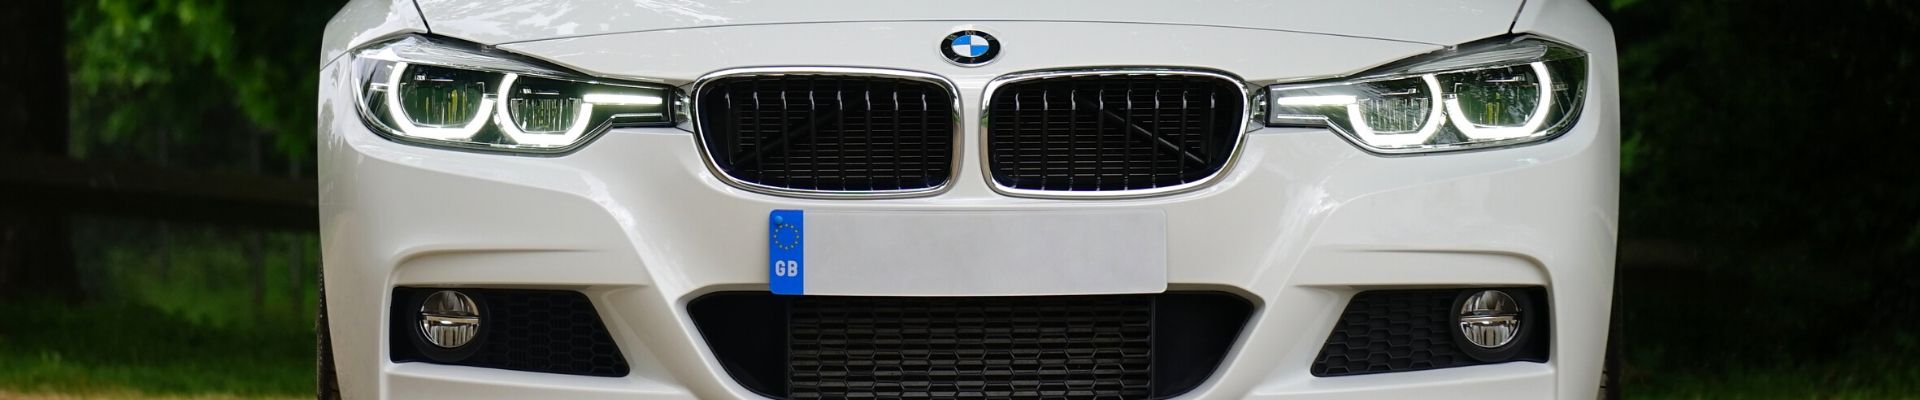 BMW Front Image